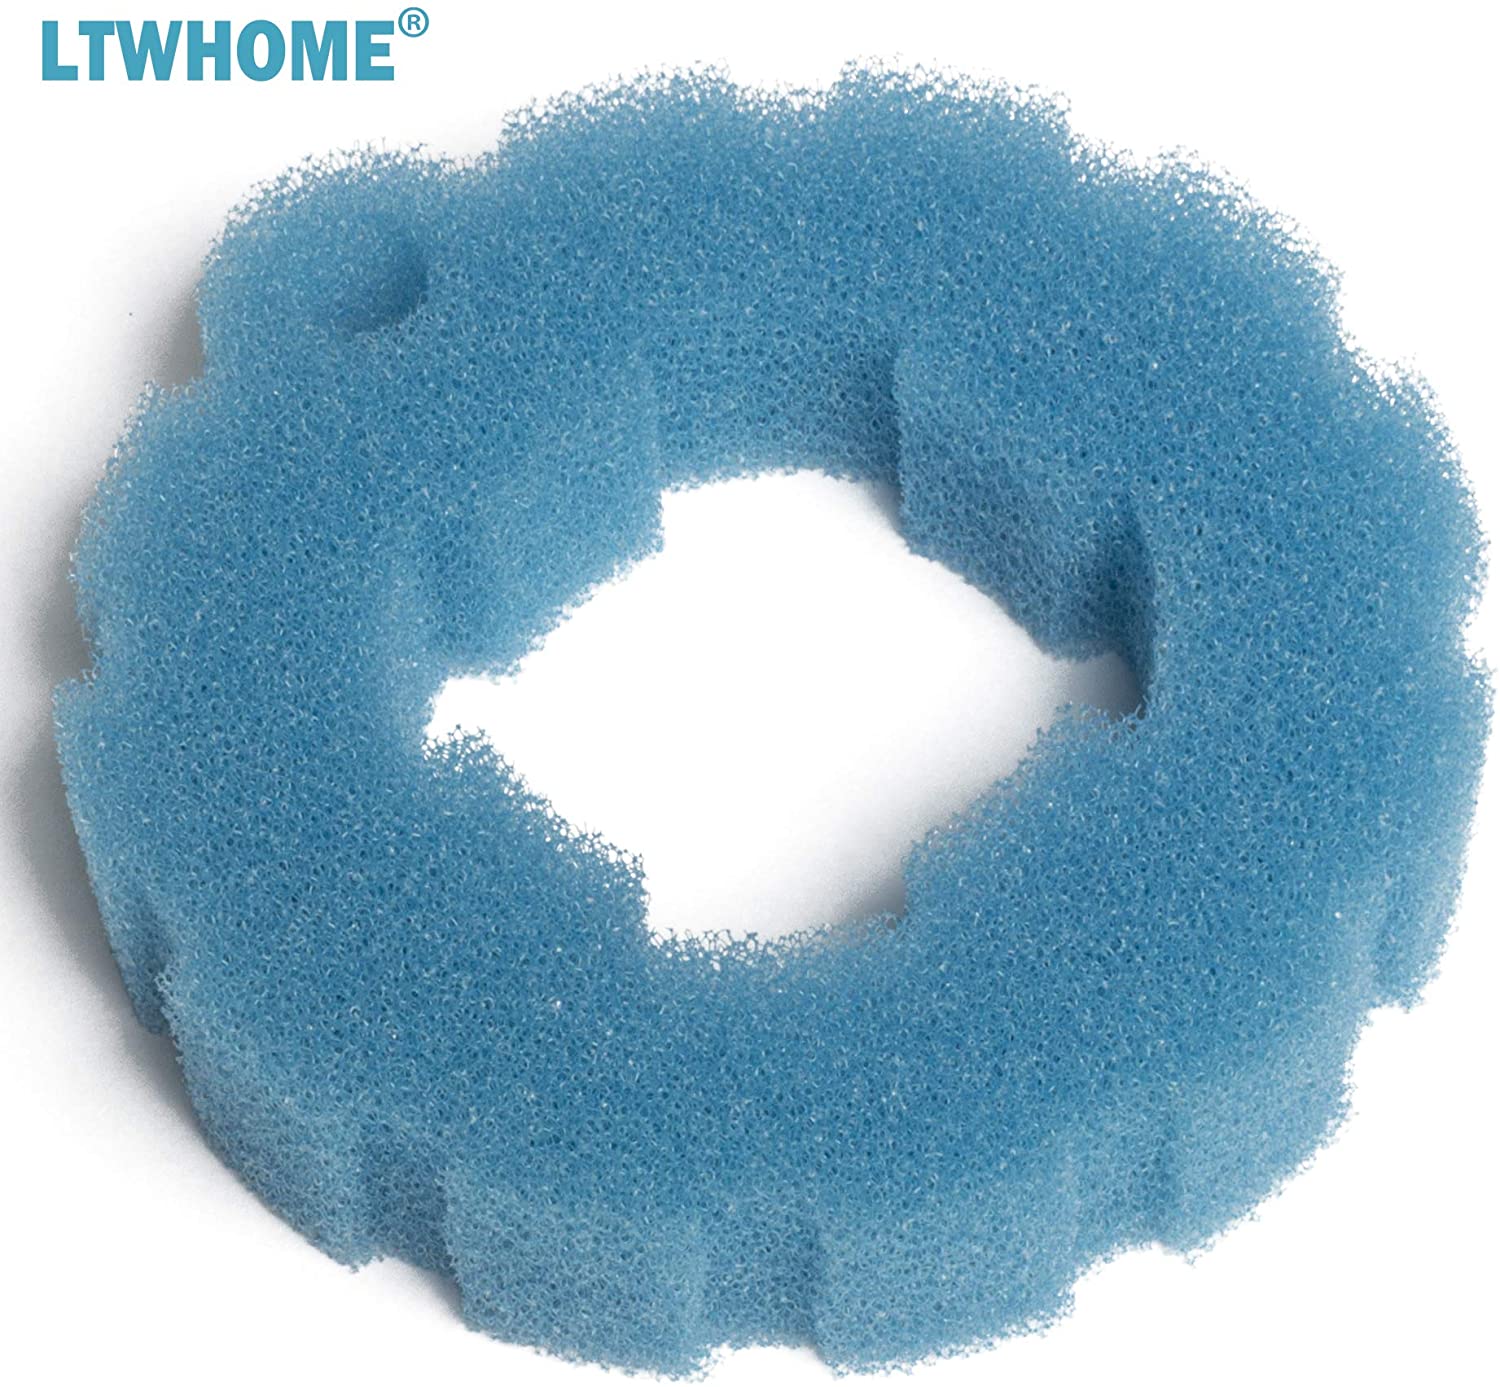 LTWHOME Filter Foam Media Kit Fits for Oase BioPress Set 4000/5000, Part NO. 15558 (Pack of 9)